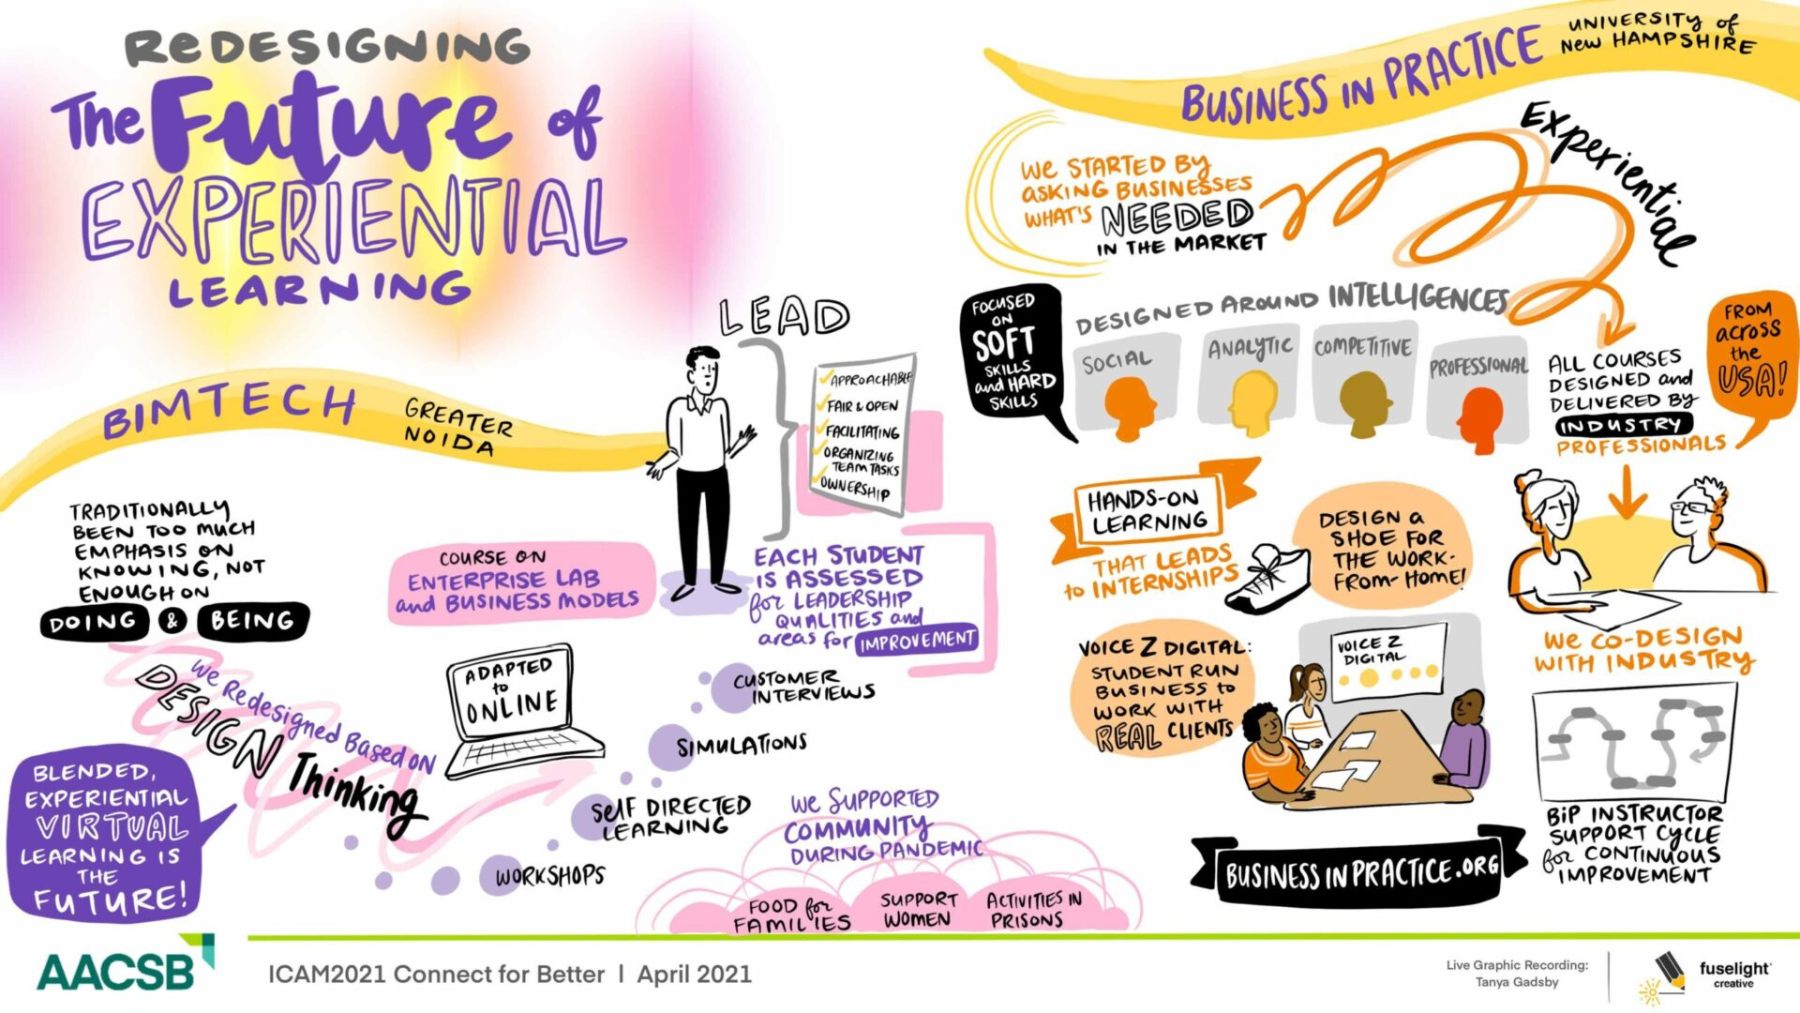 Redesigning-the-Future-of-Experiential-Learning-Graphic-Recording-April-2021-scaled